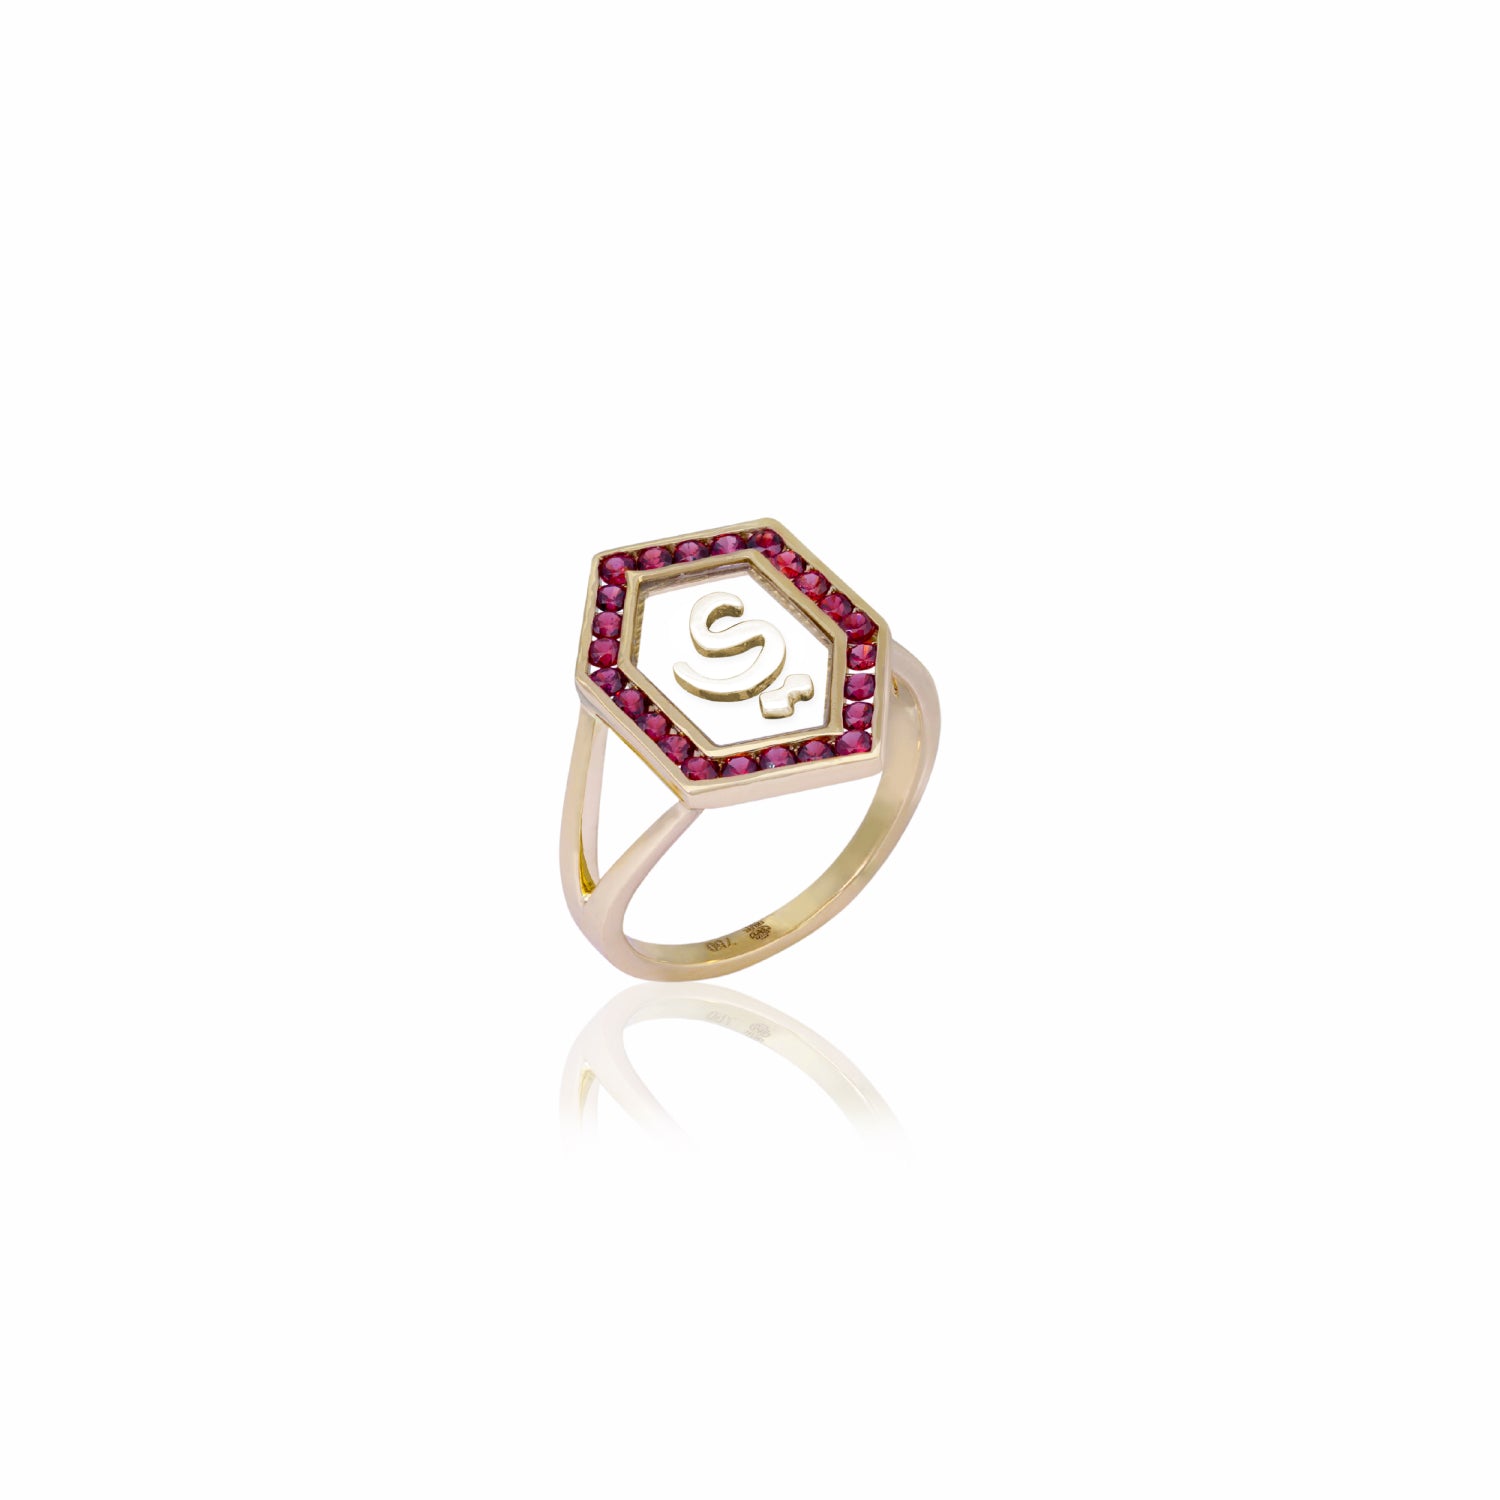 Qamoos 1.0 Letter ي Ruby Ring in Yellow Gold